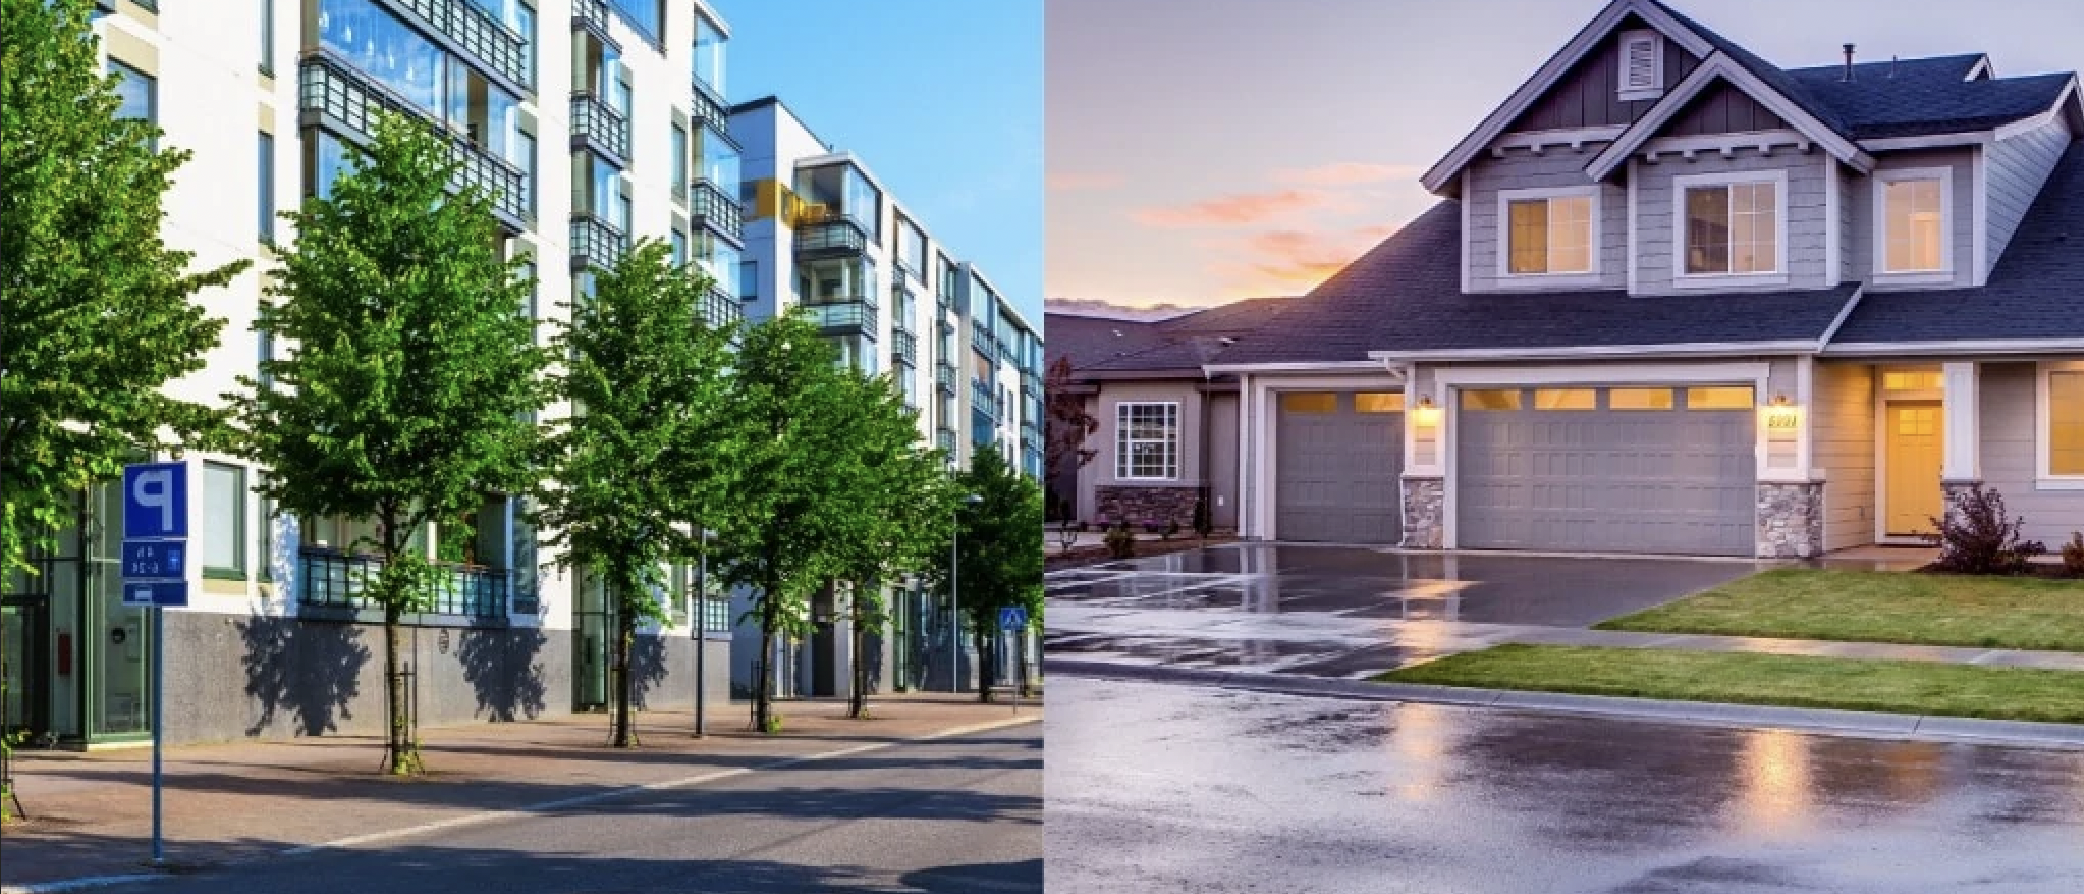 Residential Vs Commercial Property